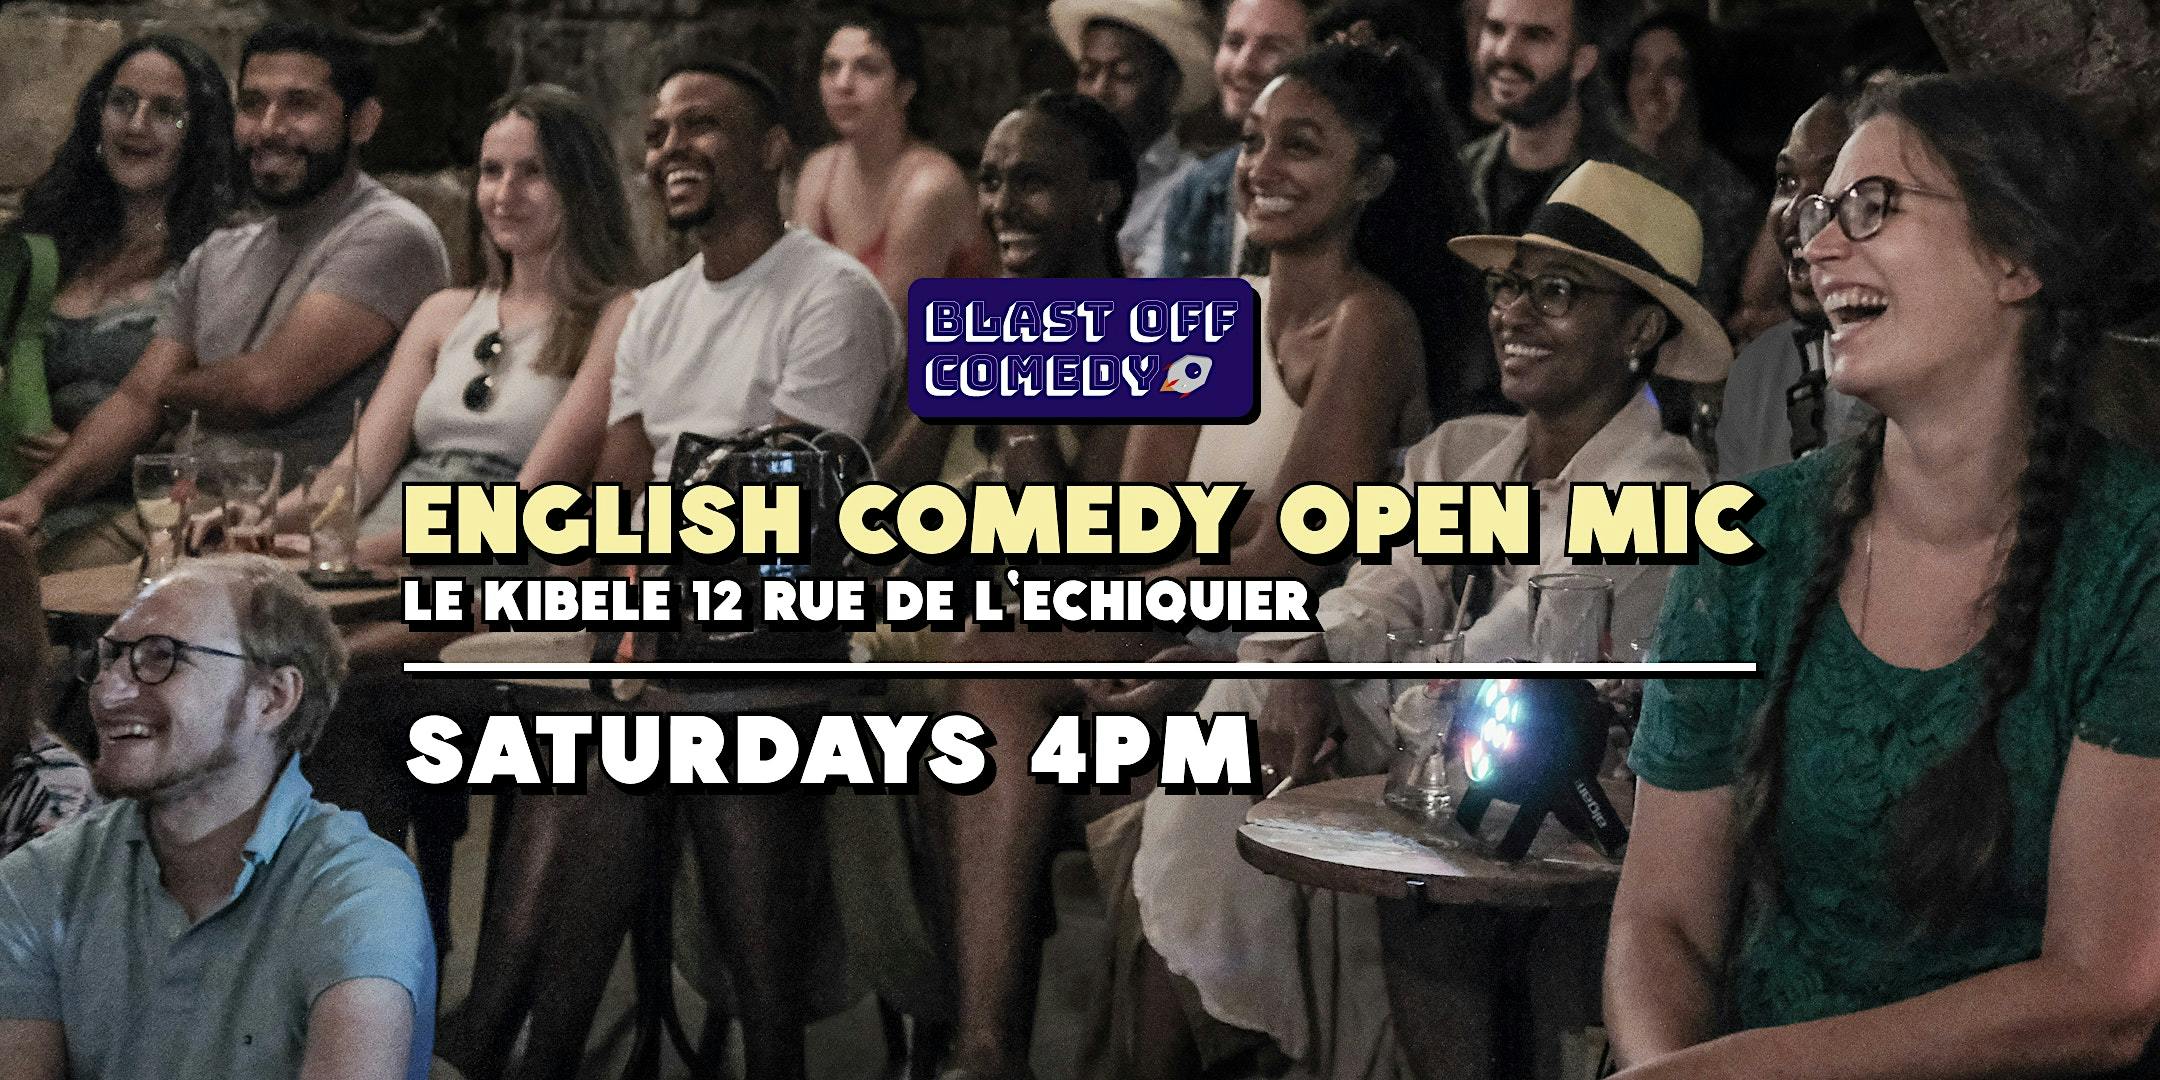 English Stand Up Comedy Open Mic 22.10 - Blast Off Comedy logo